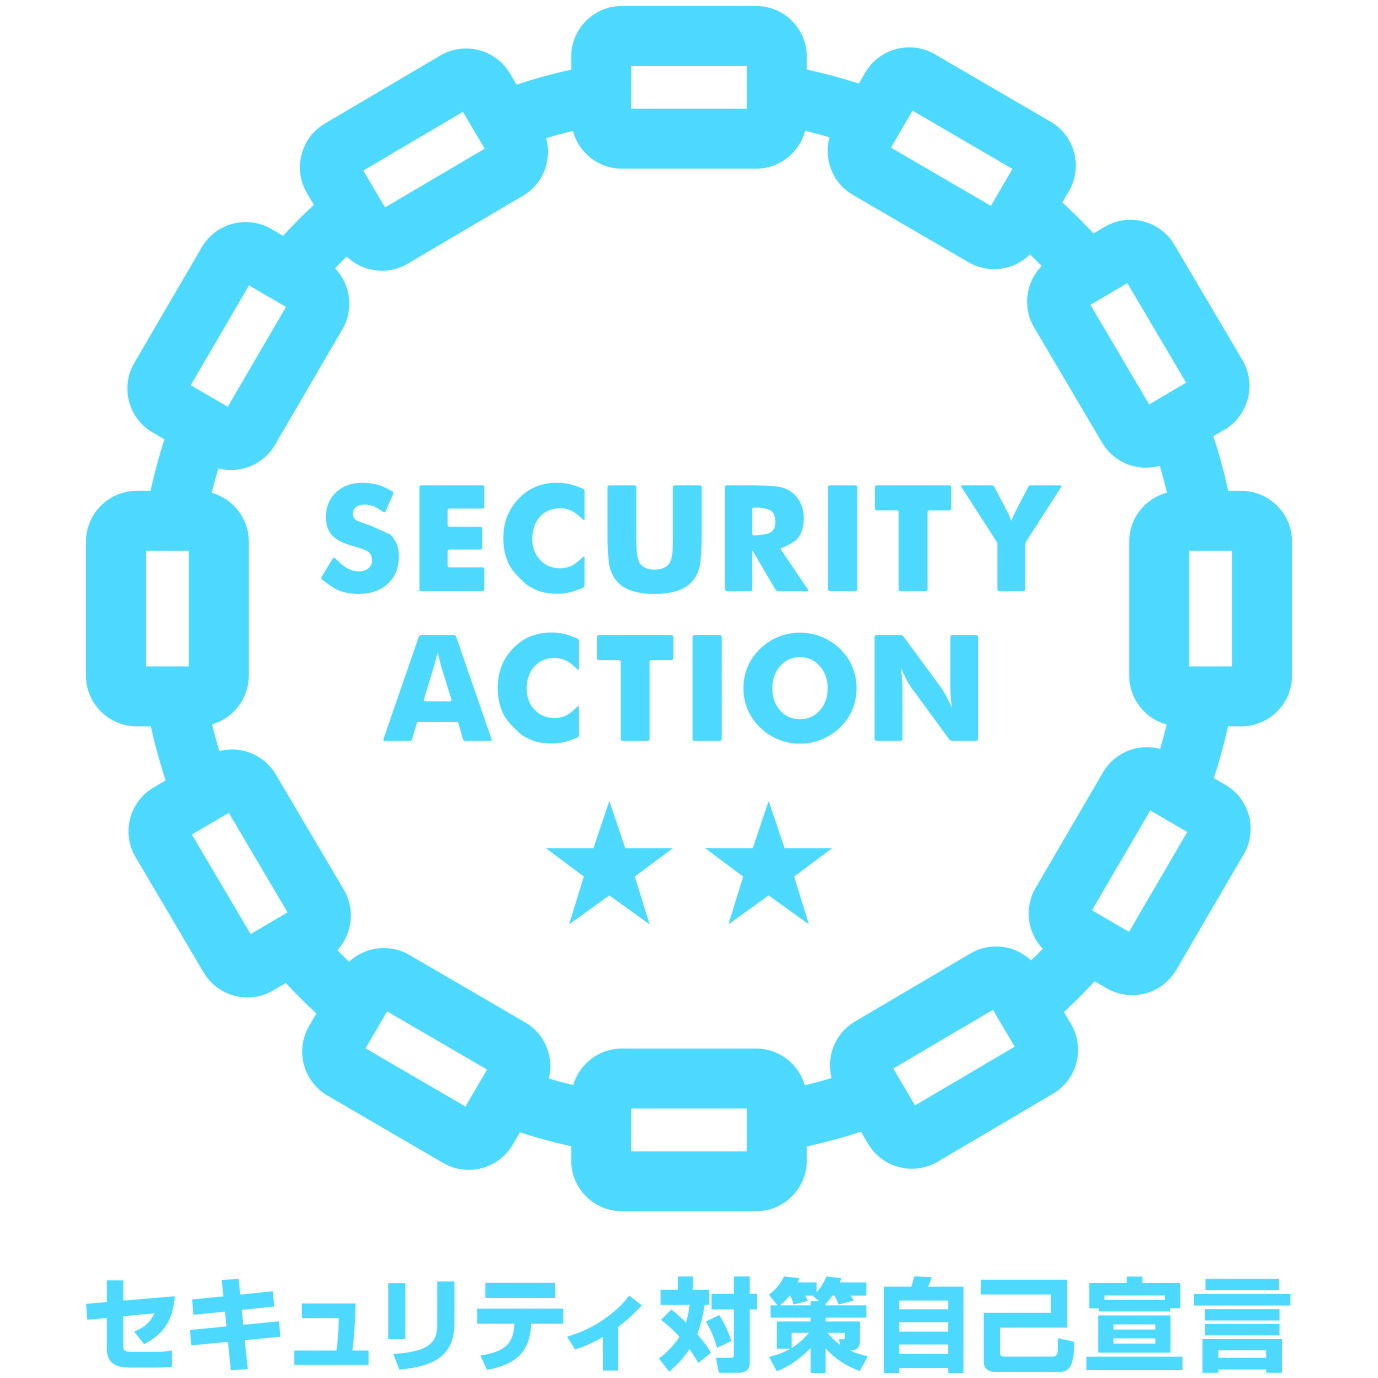 「SECURITY ACTION」宣言